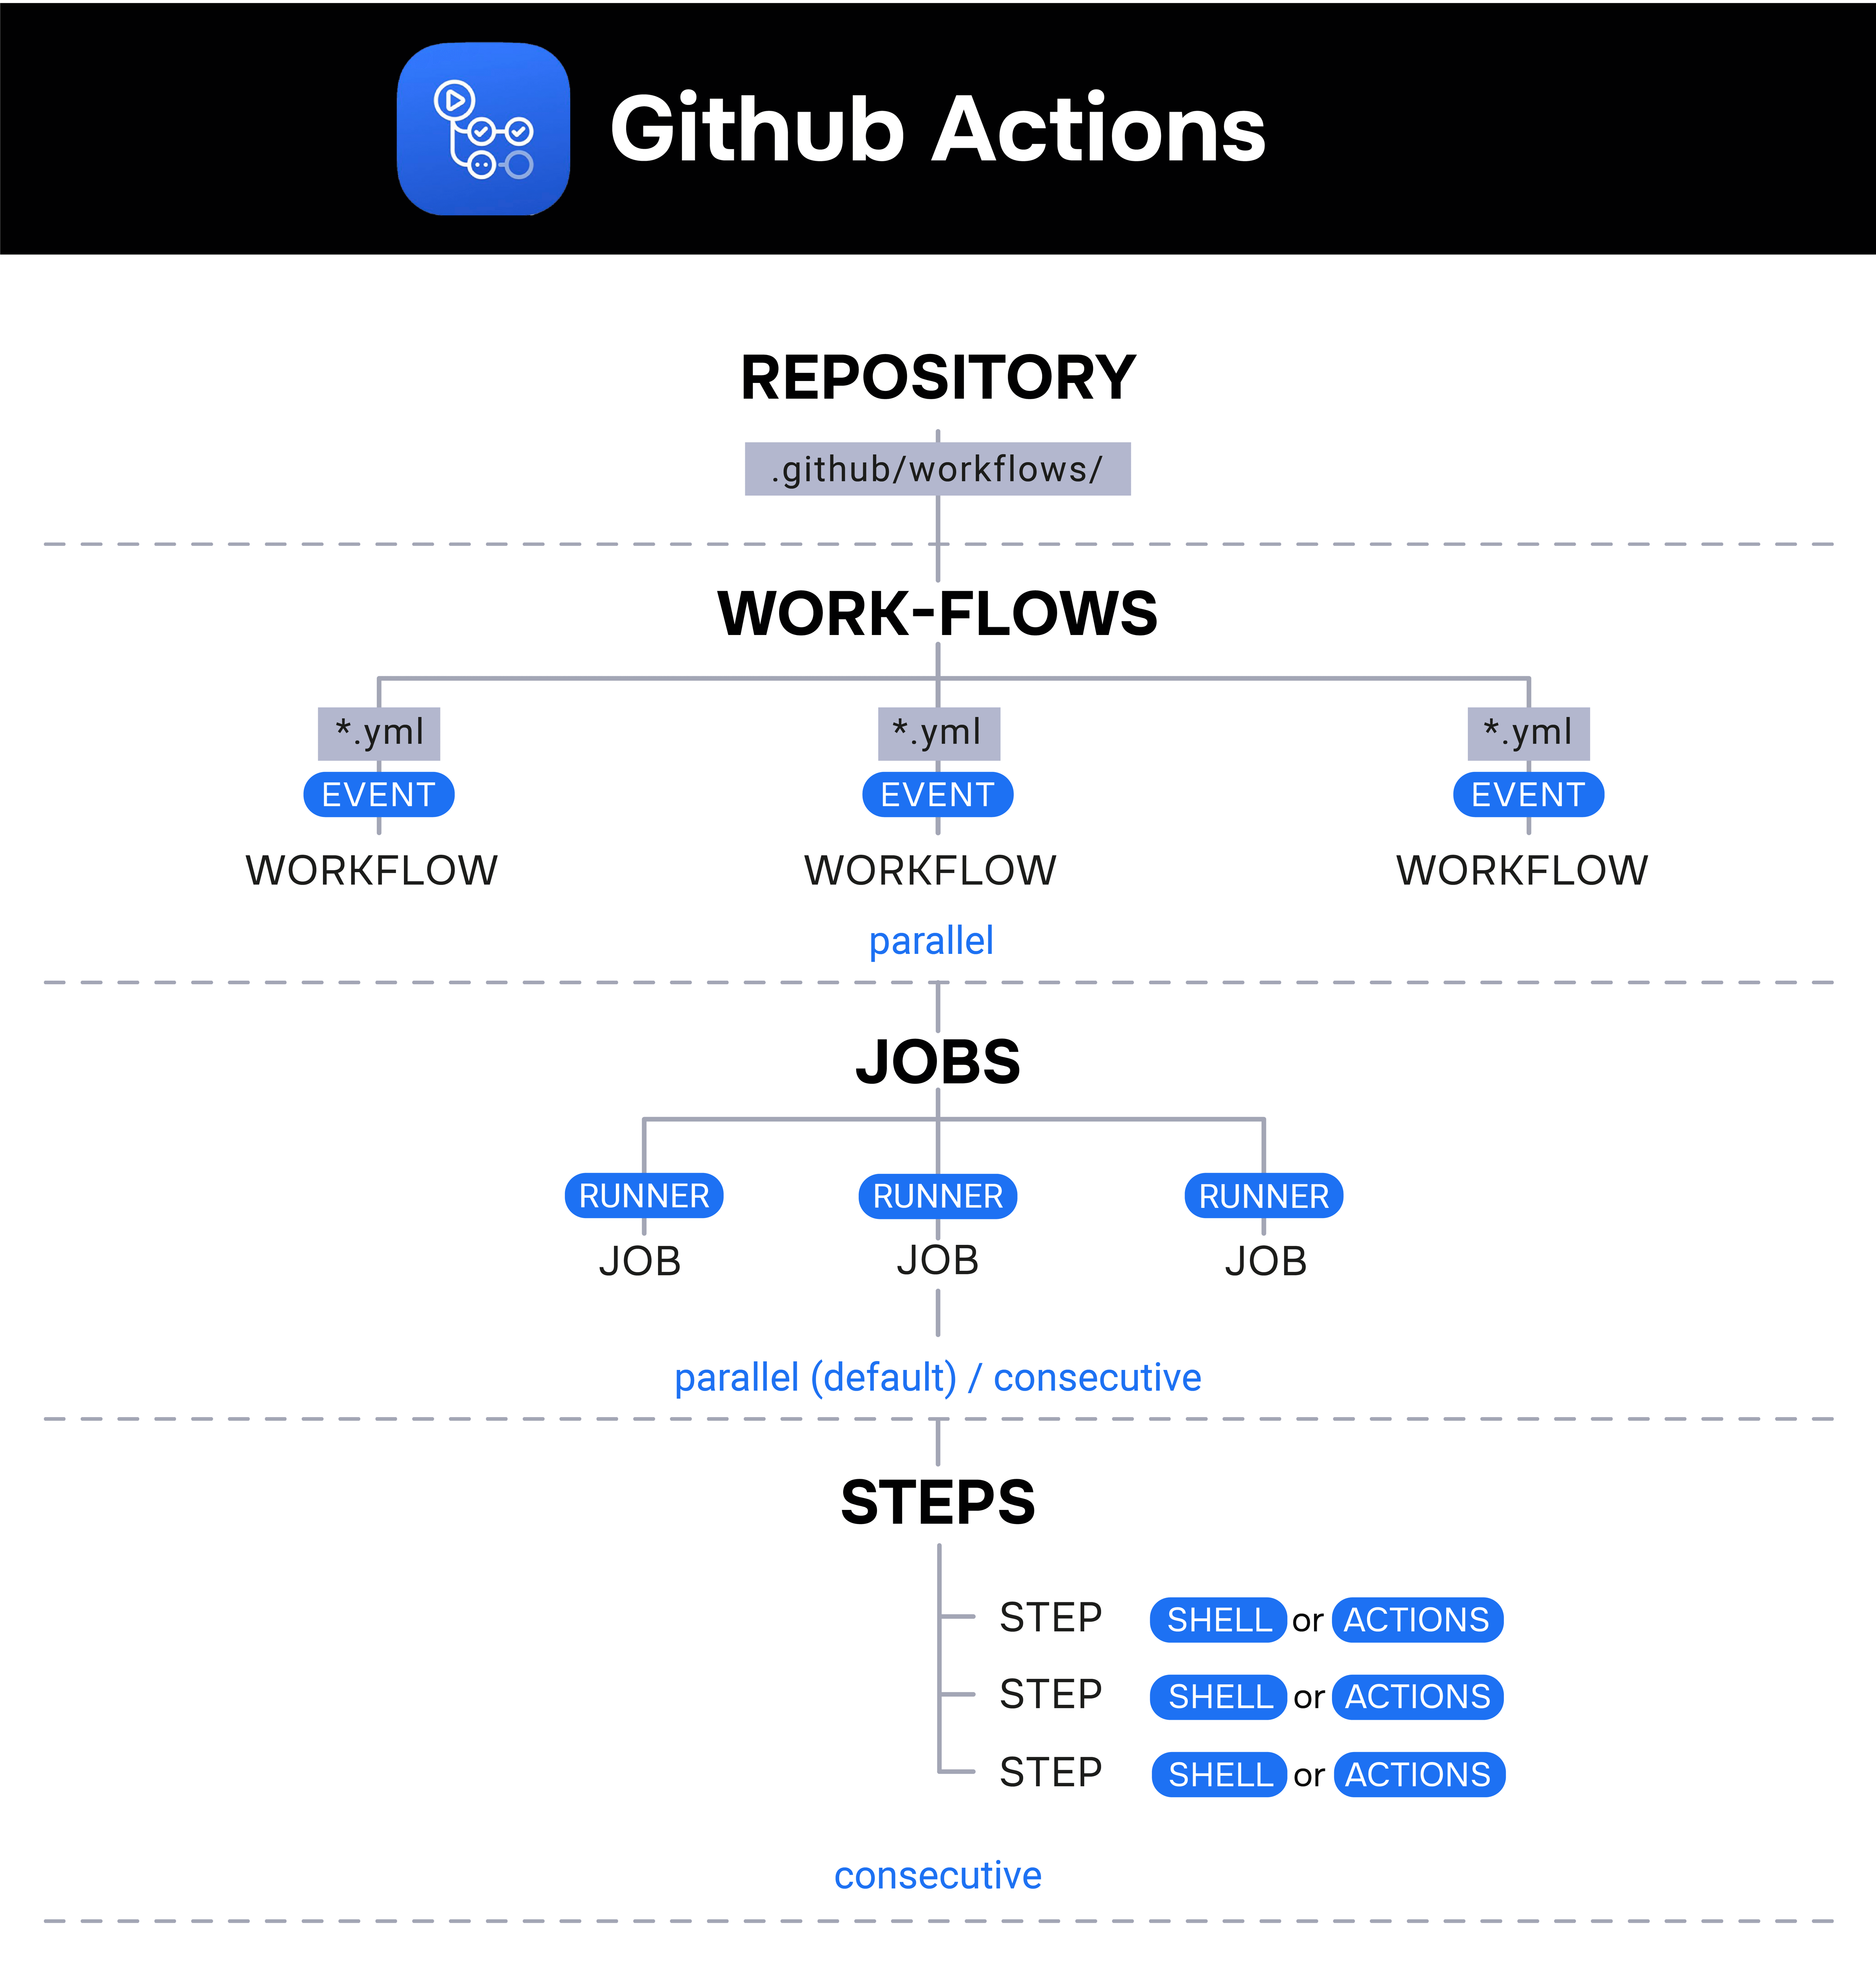 The basic concepts of Github Actions